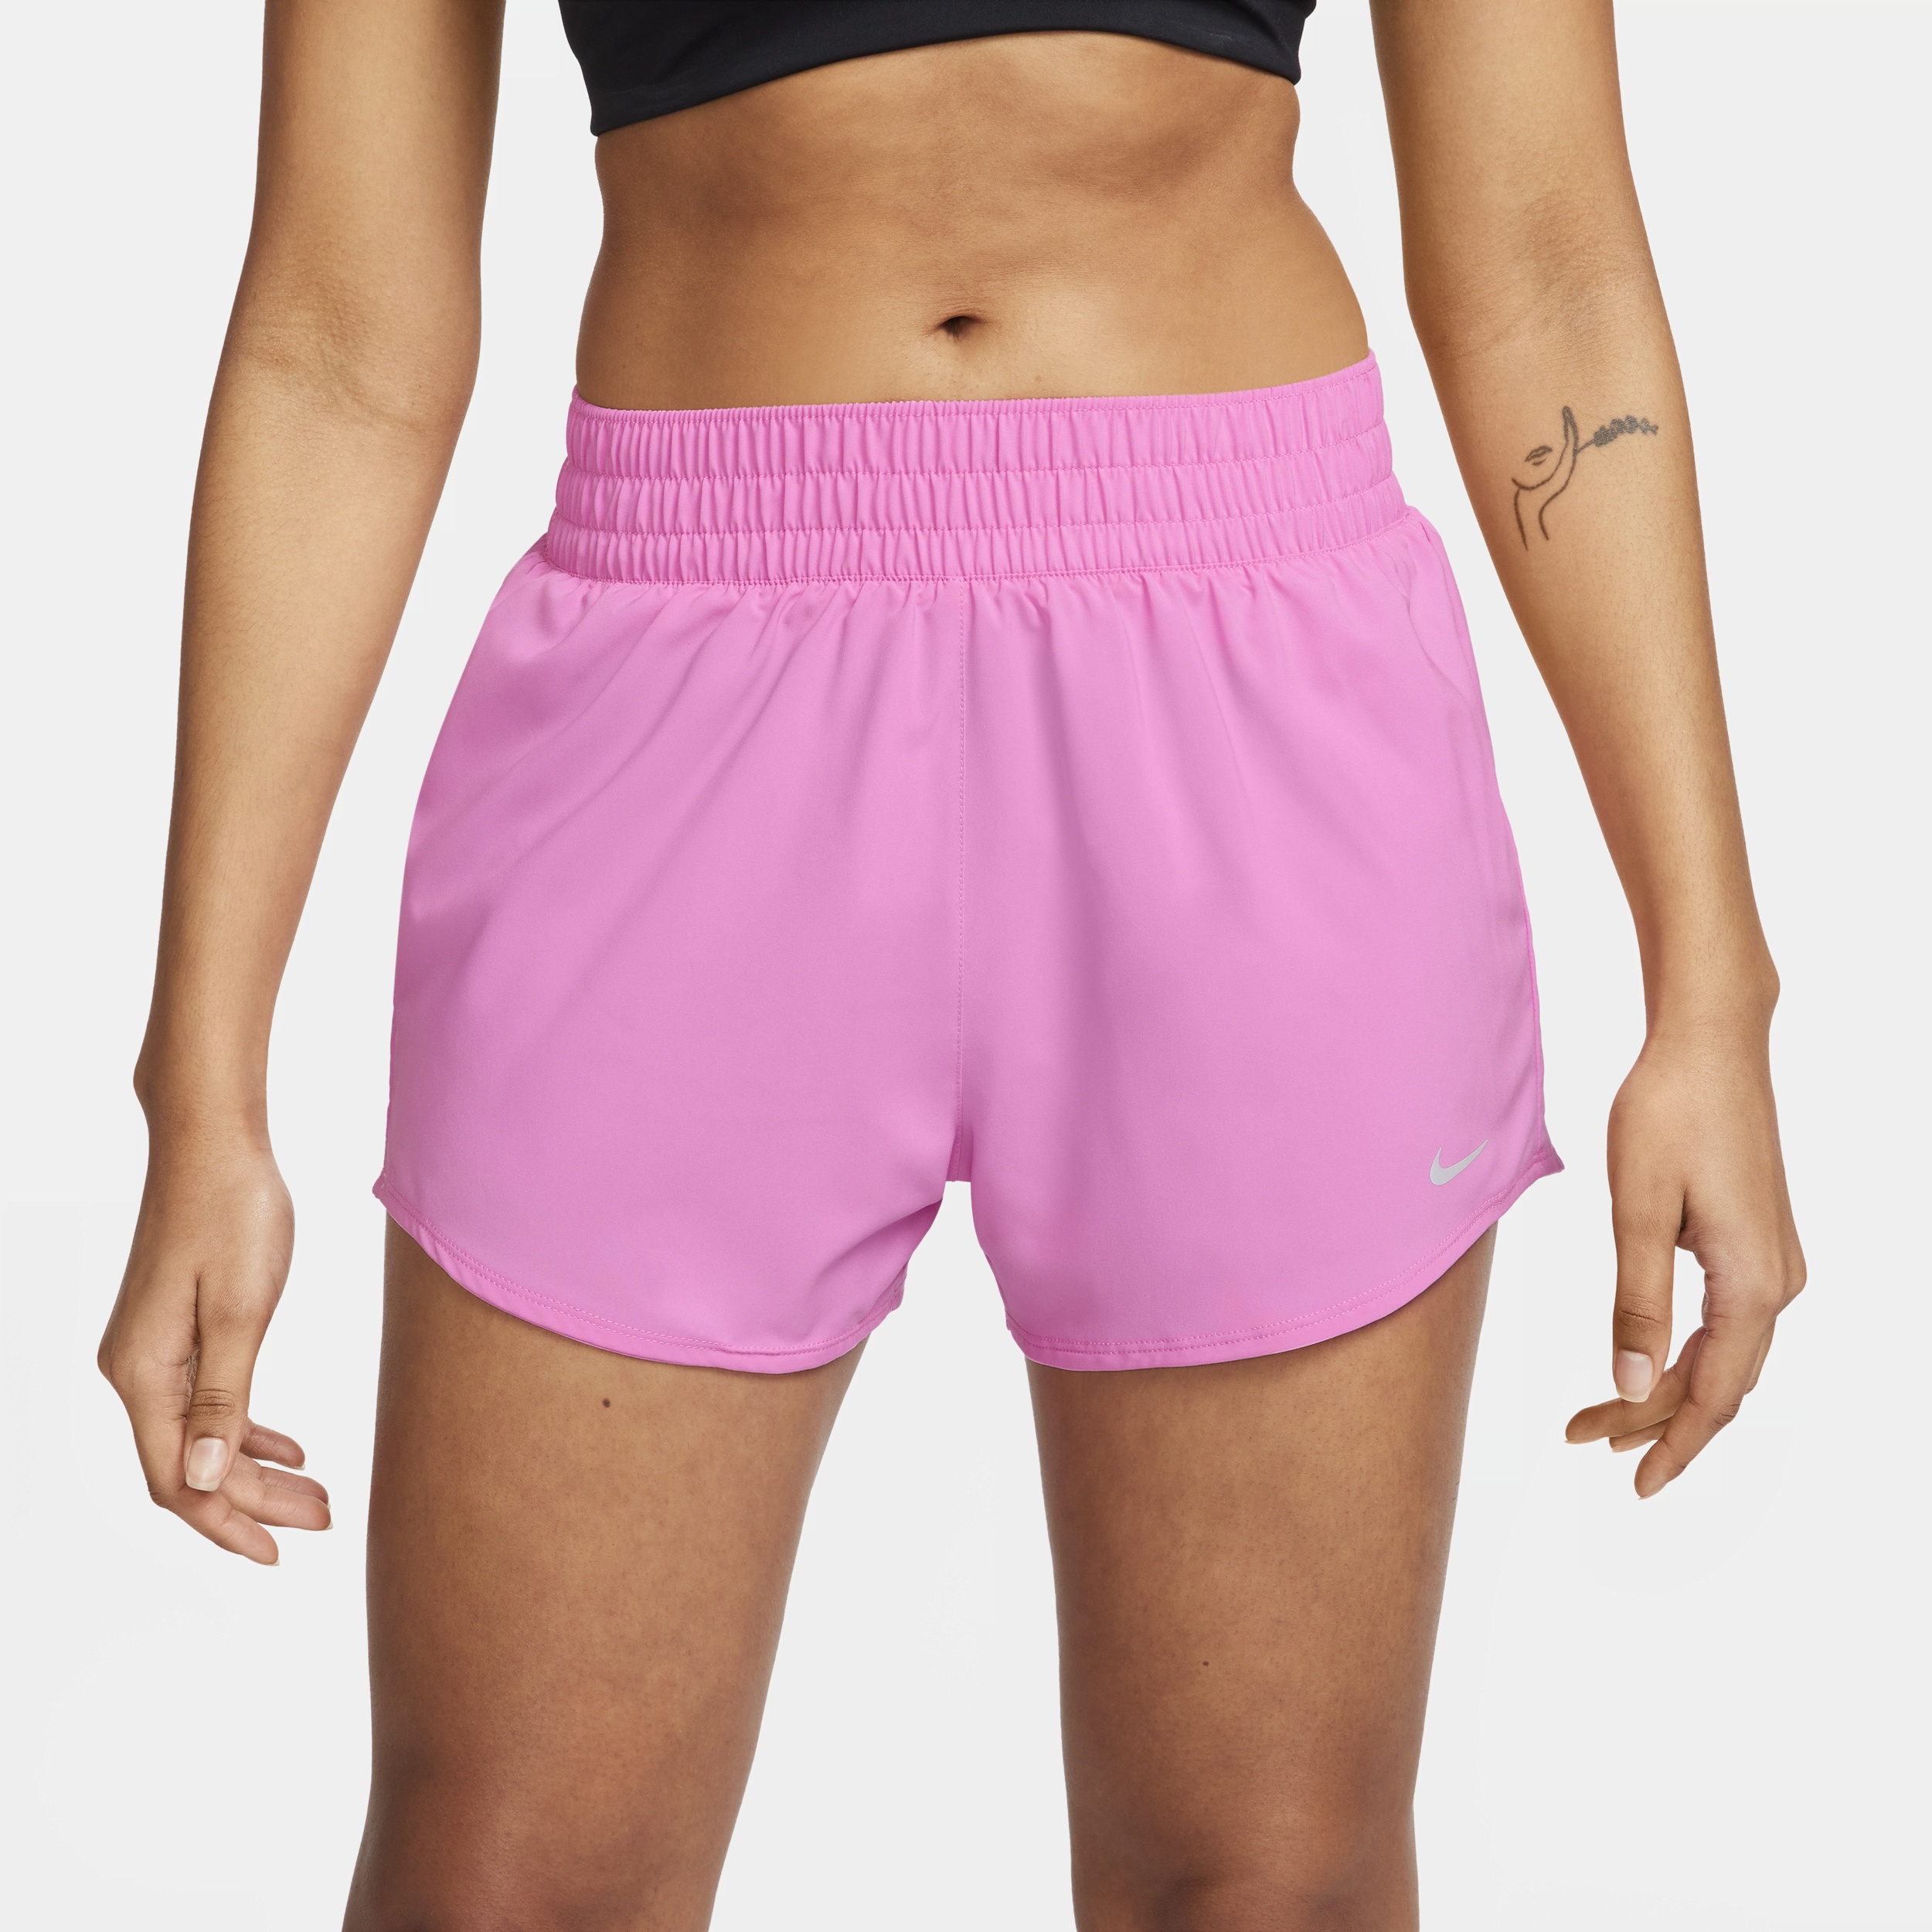 Nike Women's One Dri-FIT High-Waisted 3" Brief-Lined Shorts - 2